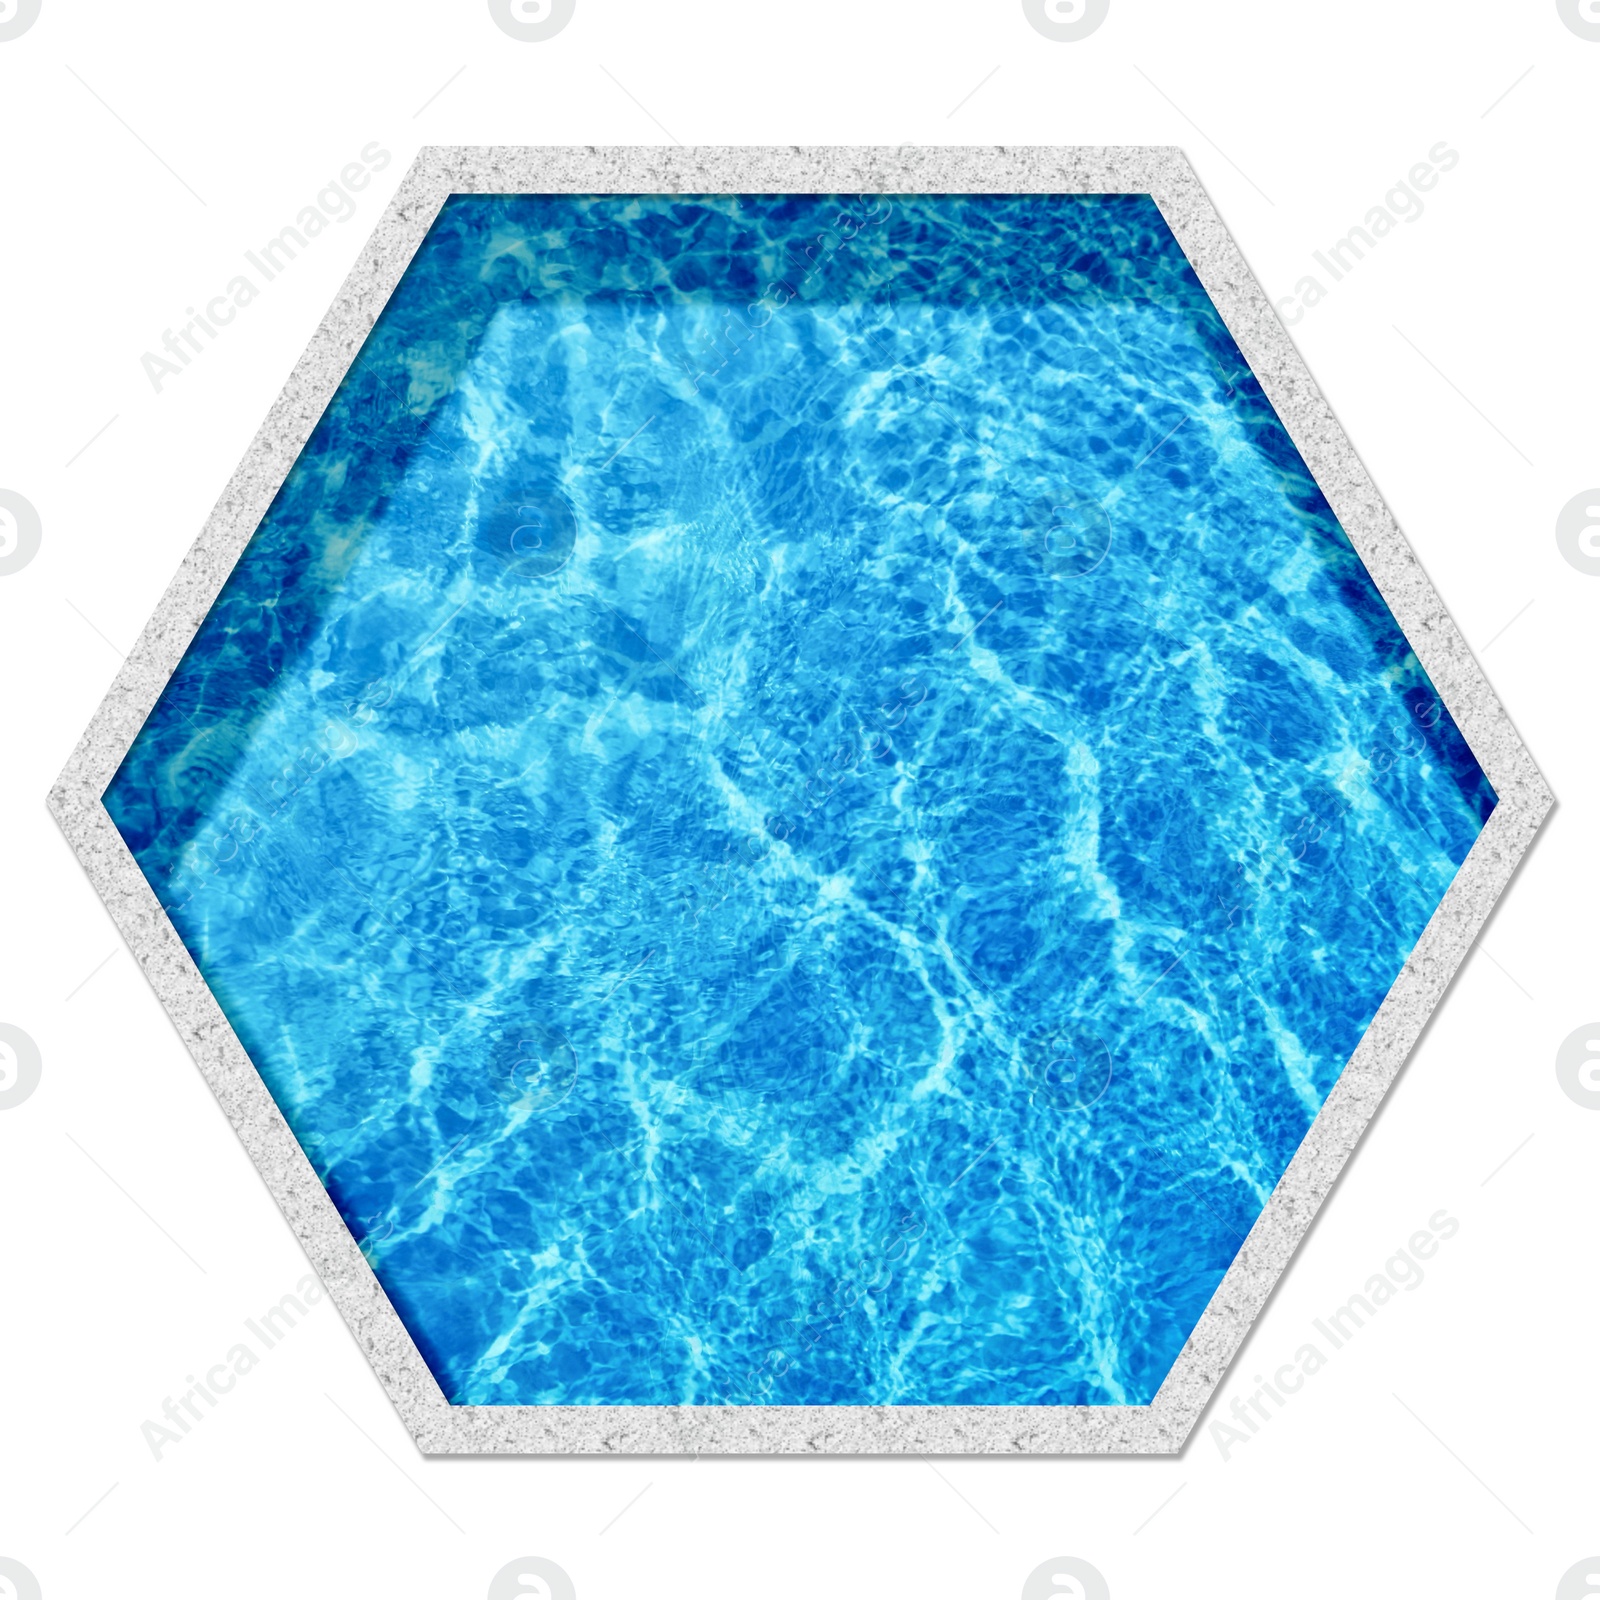 Image of Hexagon shaped swimming pool on white background, top view